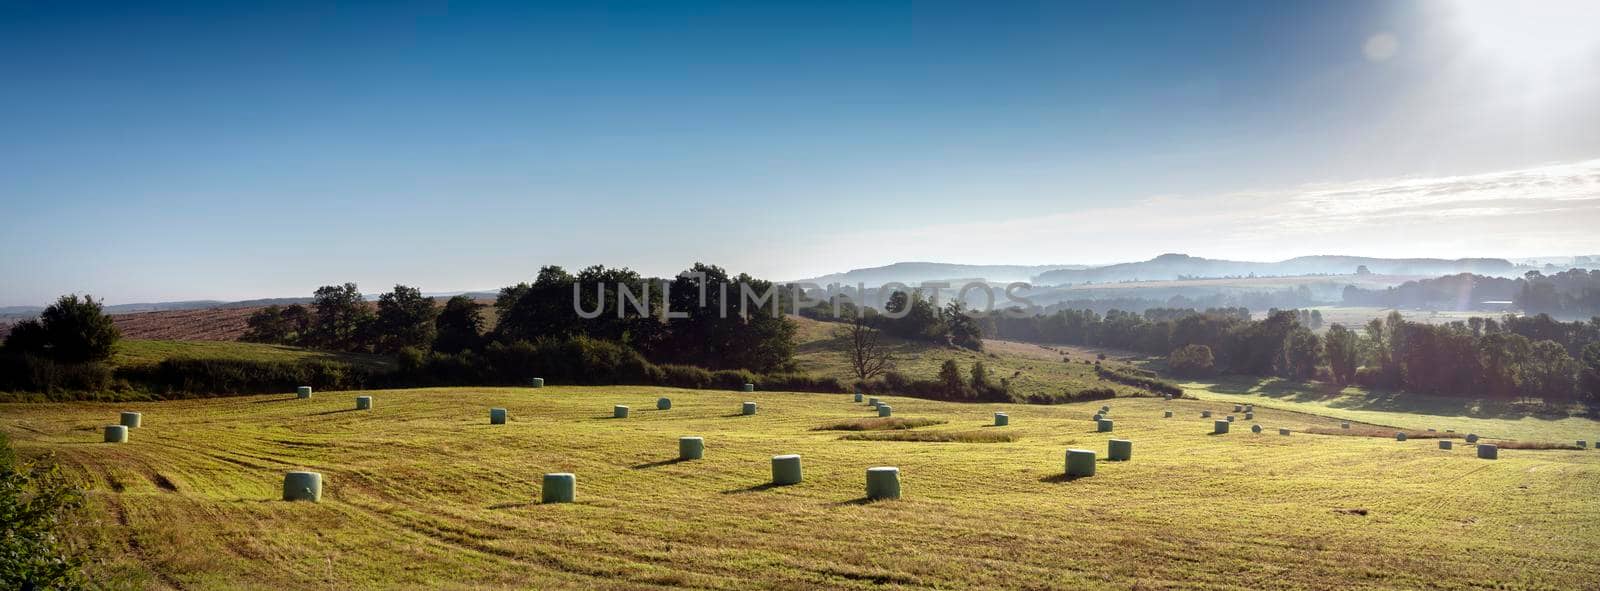 early morning landscape with hay bales in french ardennes by ahavelaar